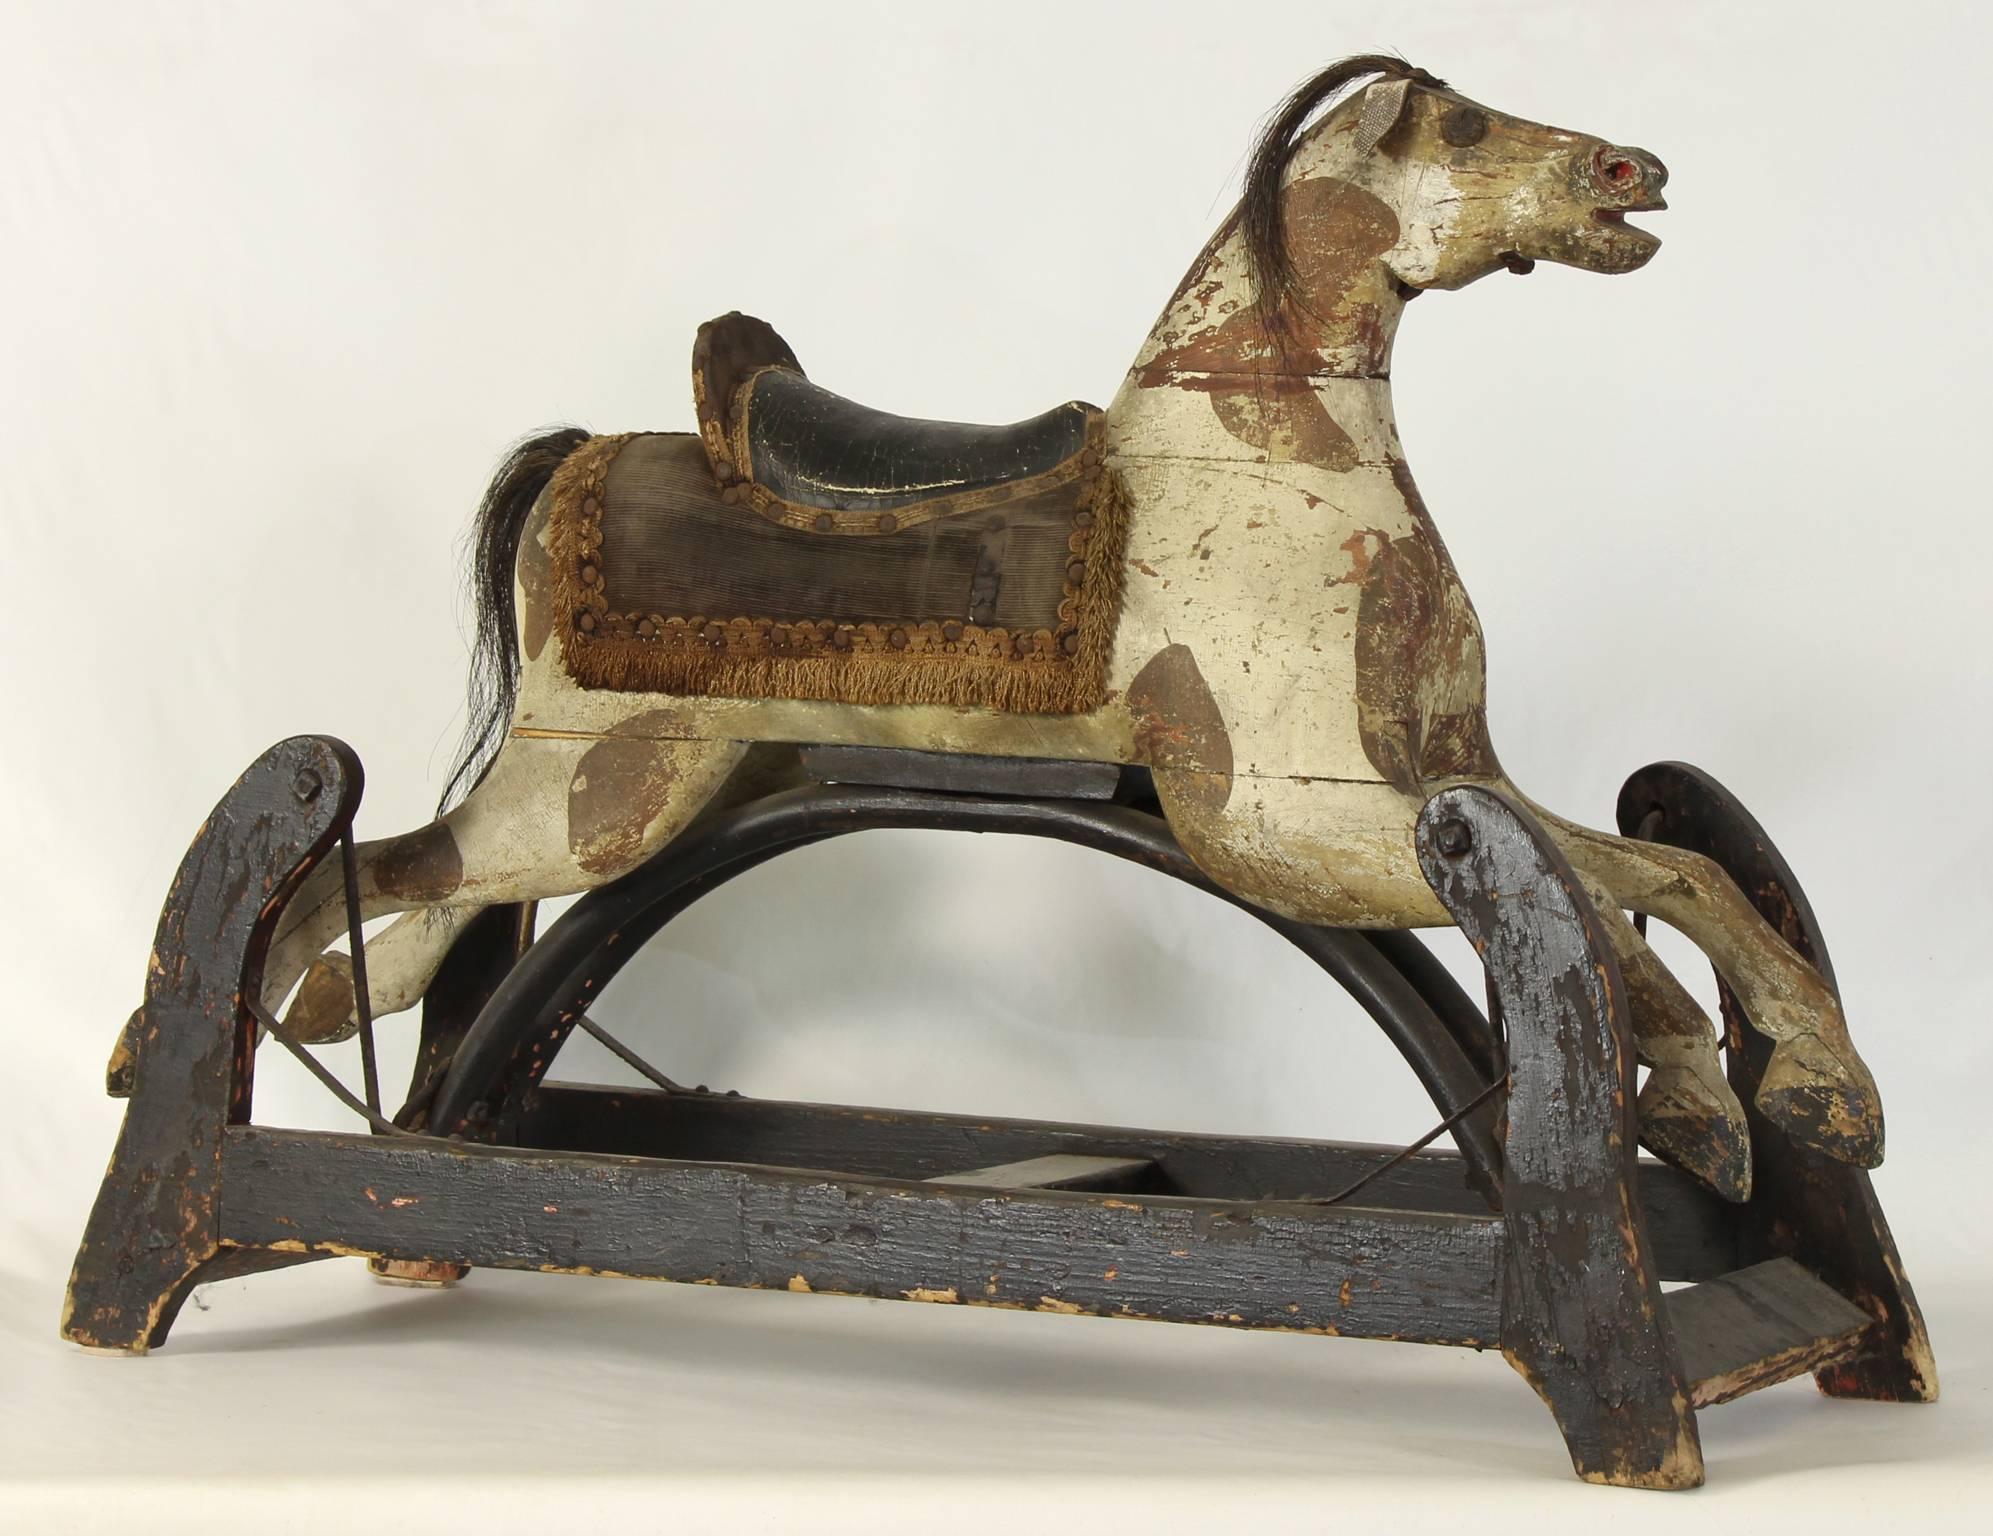 A wonderful and whimsical, late 19th century American child's rocking horse complete with original paint decoration, horsehair main and leather saddle.